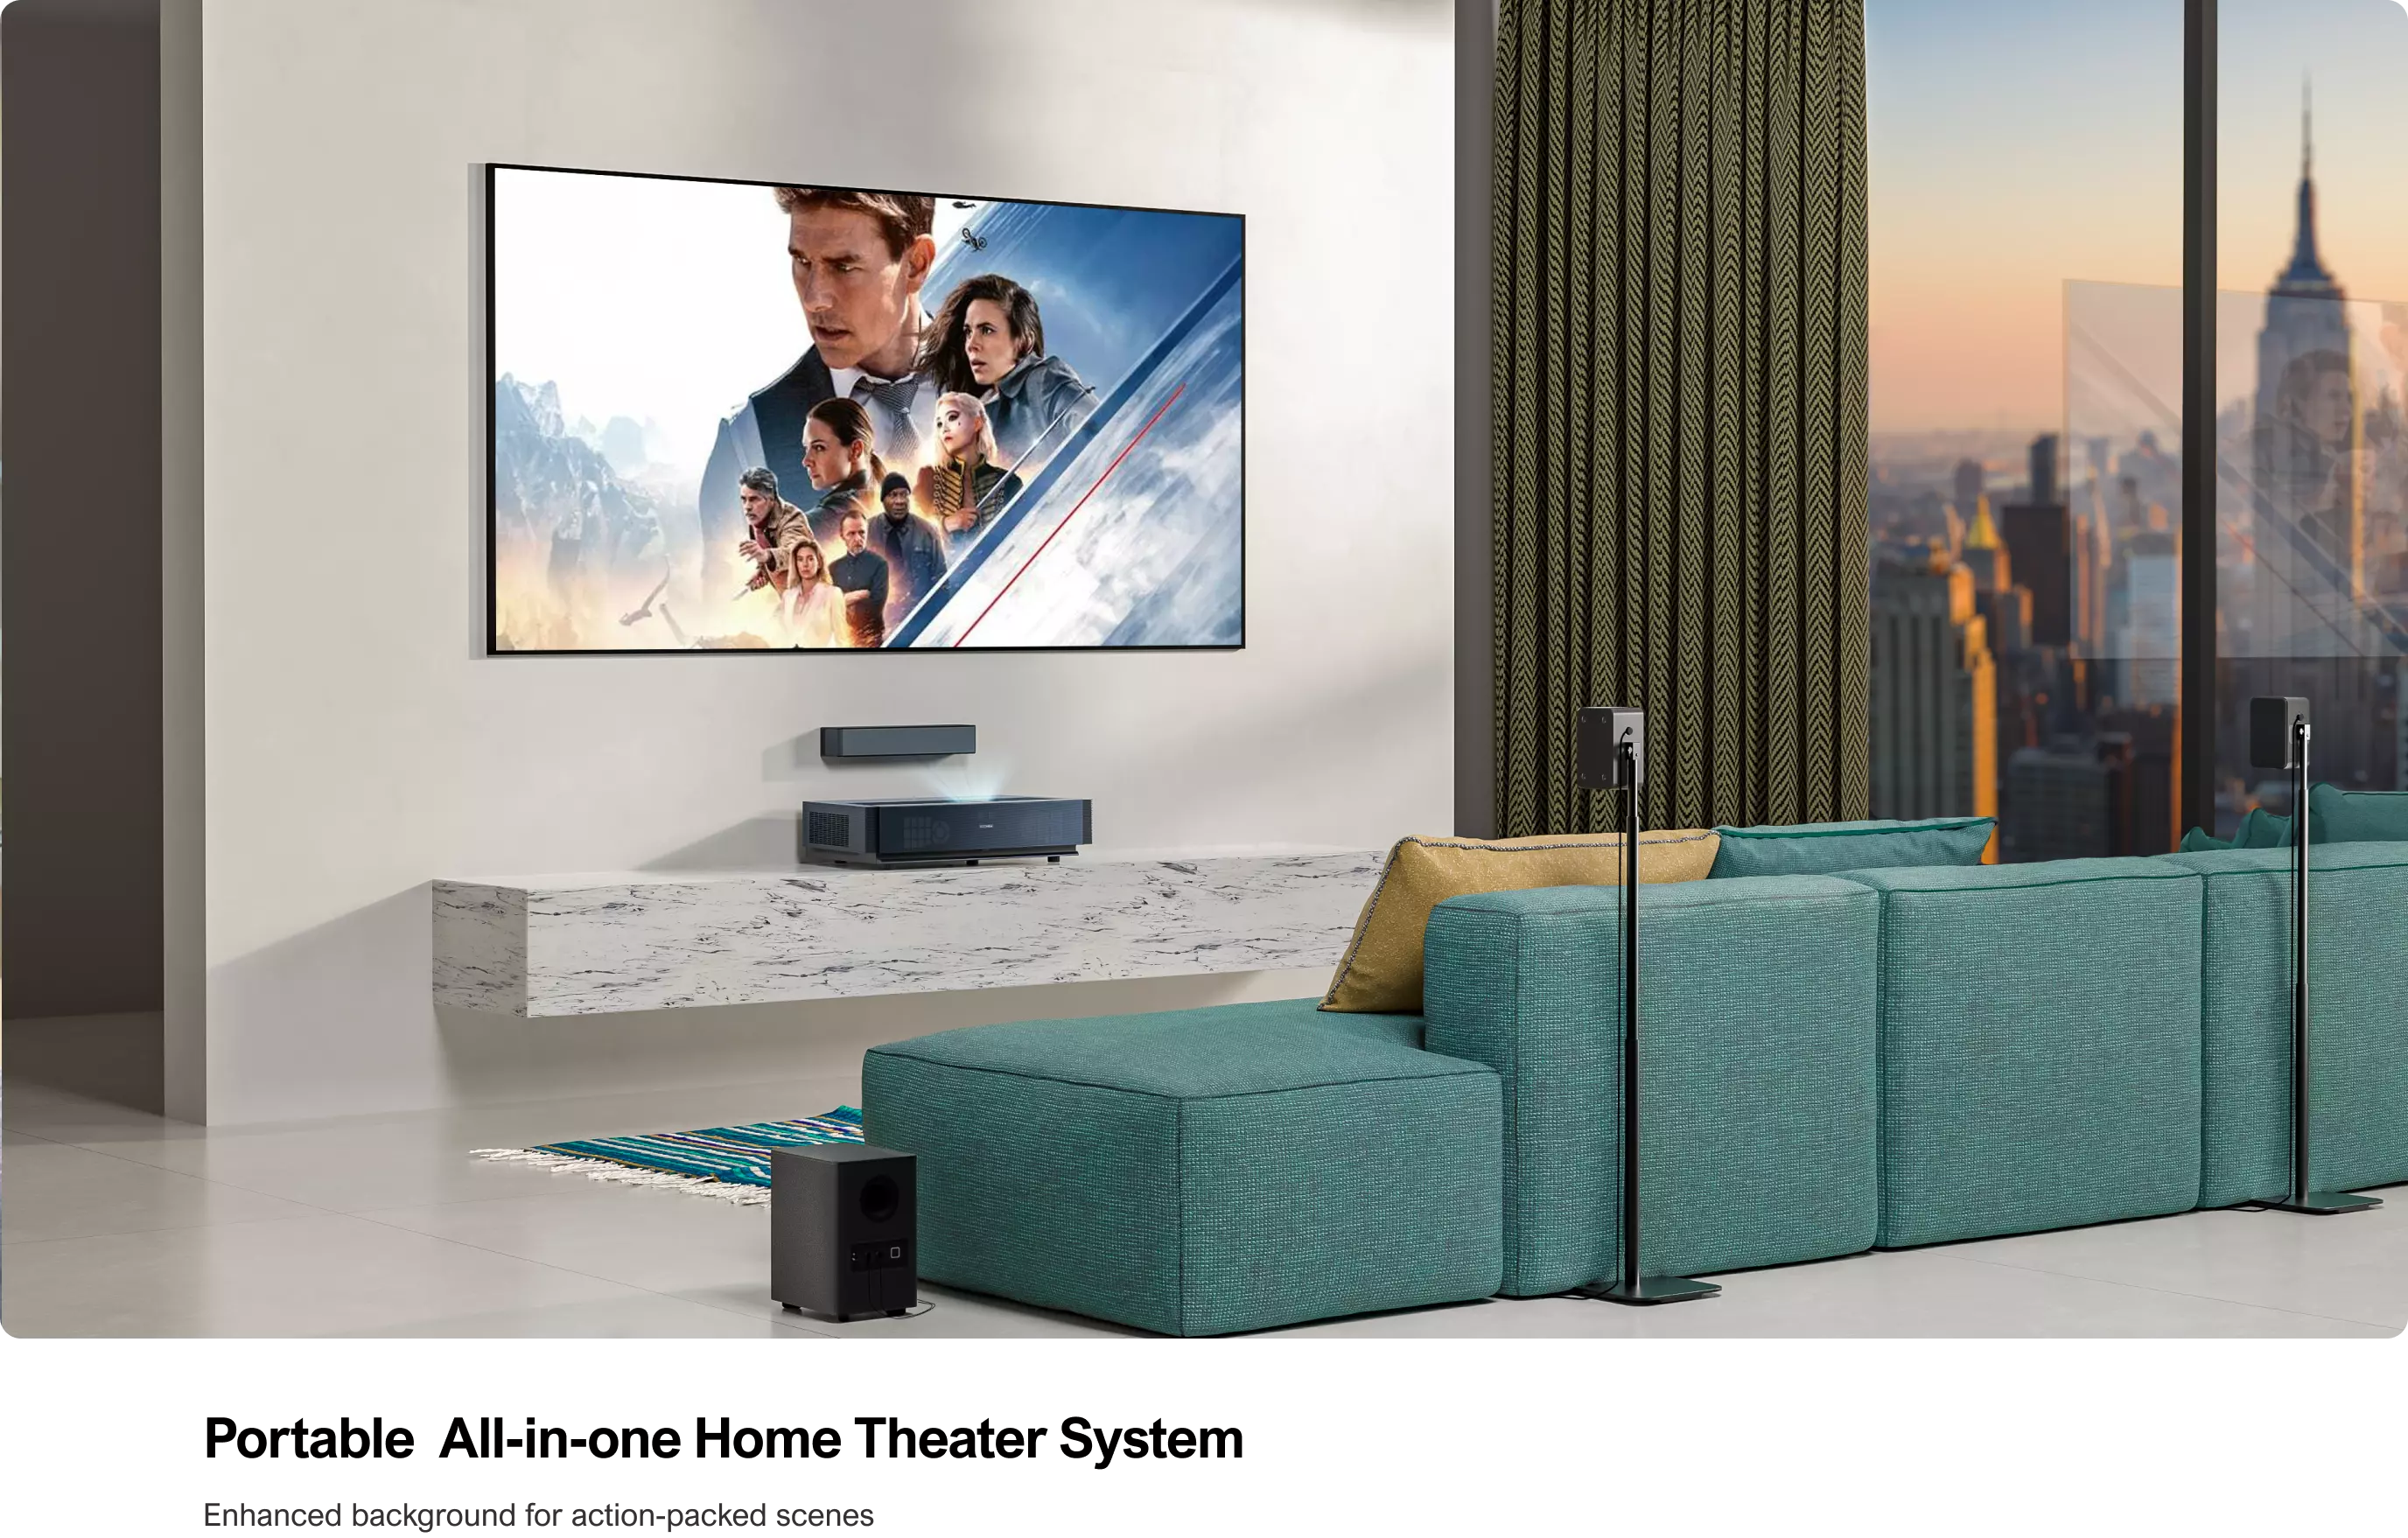 Hey there! Welcome to our Poseidon D60 soundbar operation video. 🎉